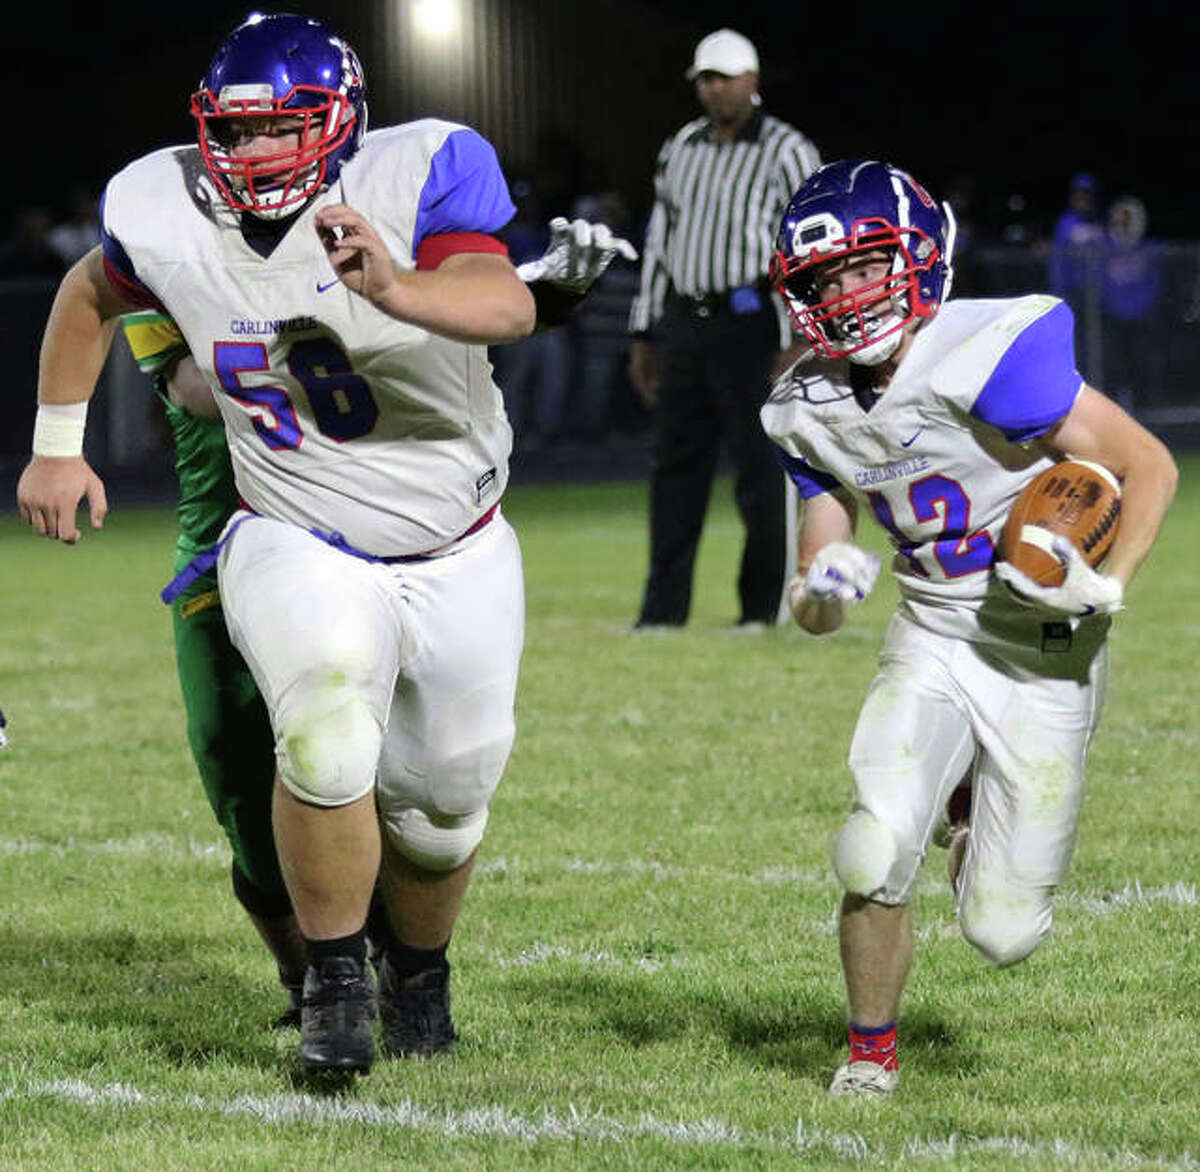 Carlinville offensive lineman Ethan Trimm (left) leads the way for running back Joe Lewis for a 38-yard run during a South Central Conference football game against Southwestern last season at Knapp Field in Piasa.